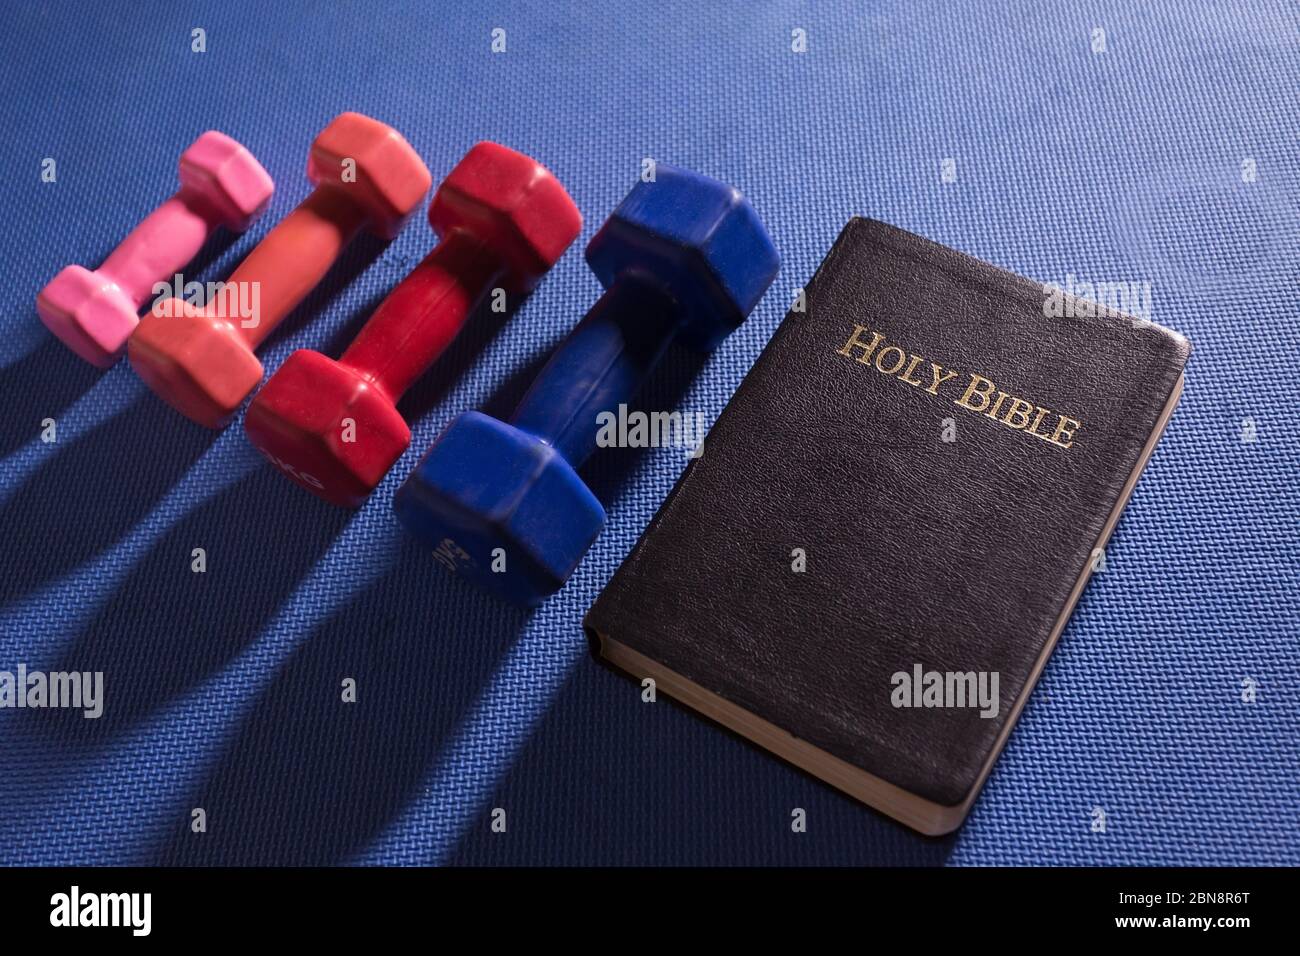 Dumbbells on a blue gym workout mat next to the Holy Scriptures Stock Photo